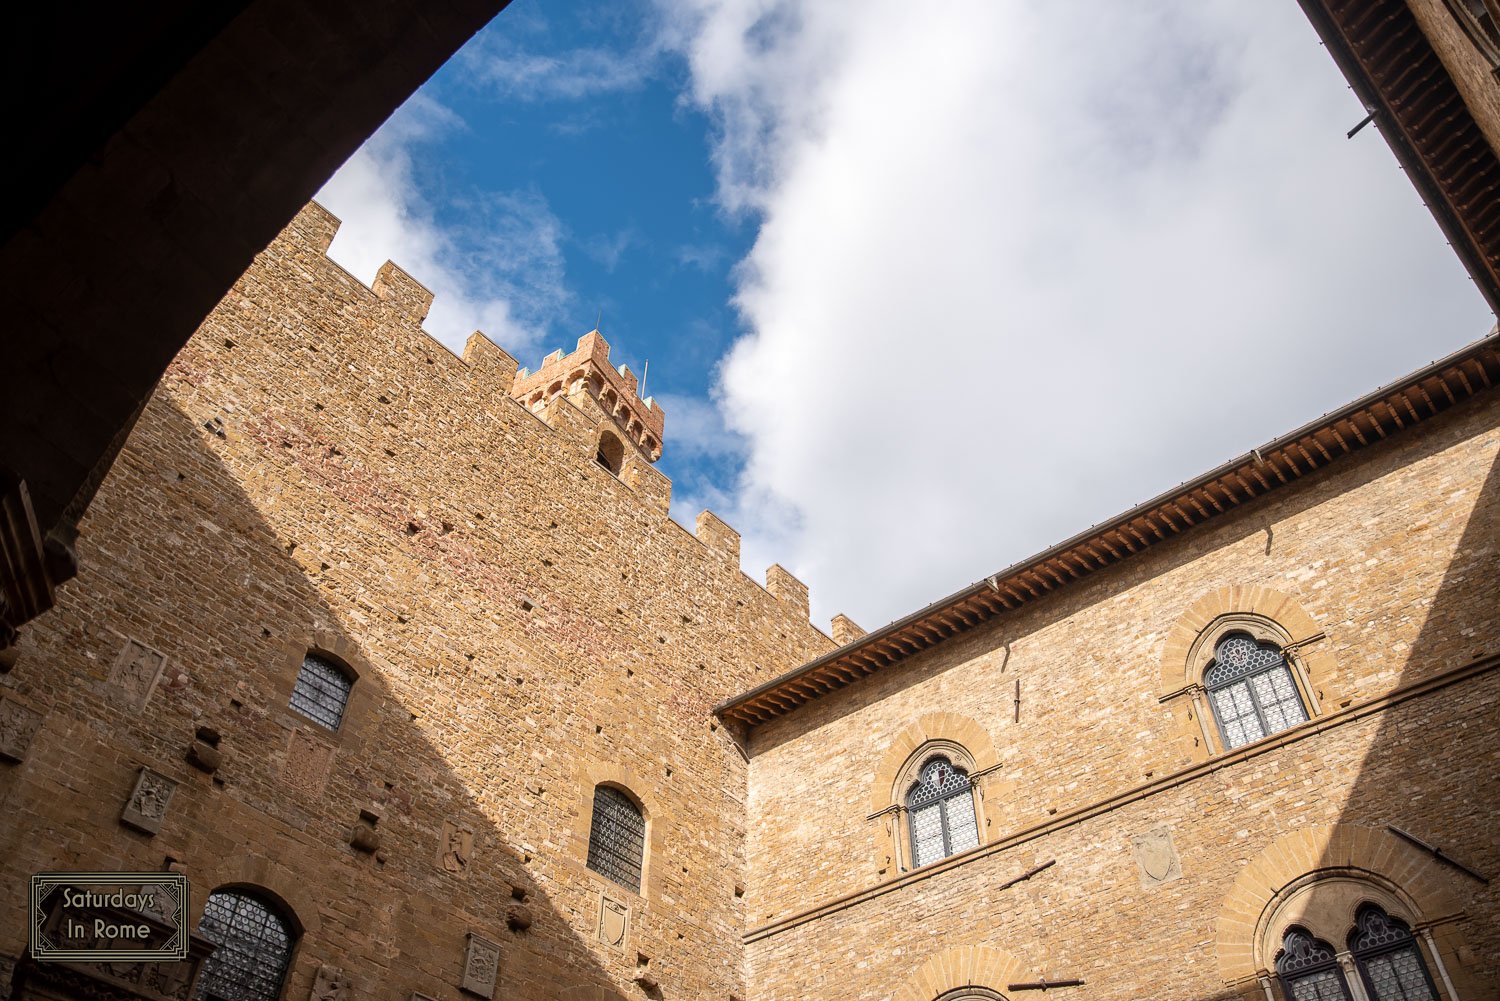 The Bargello Museum in Florence, Italy